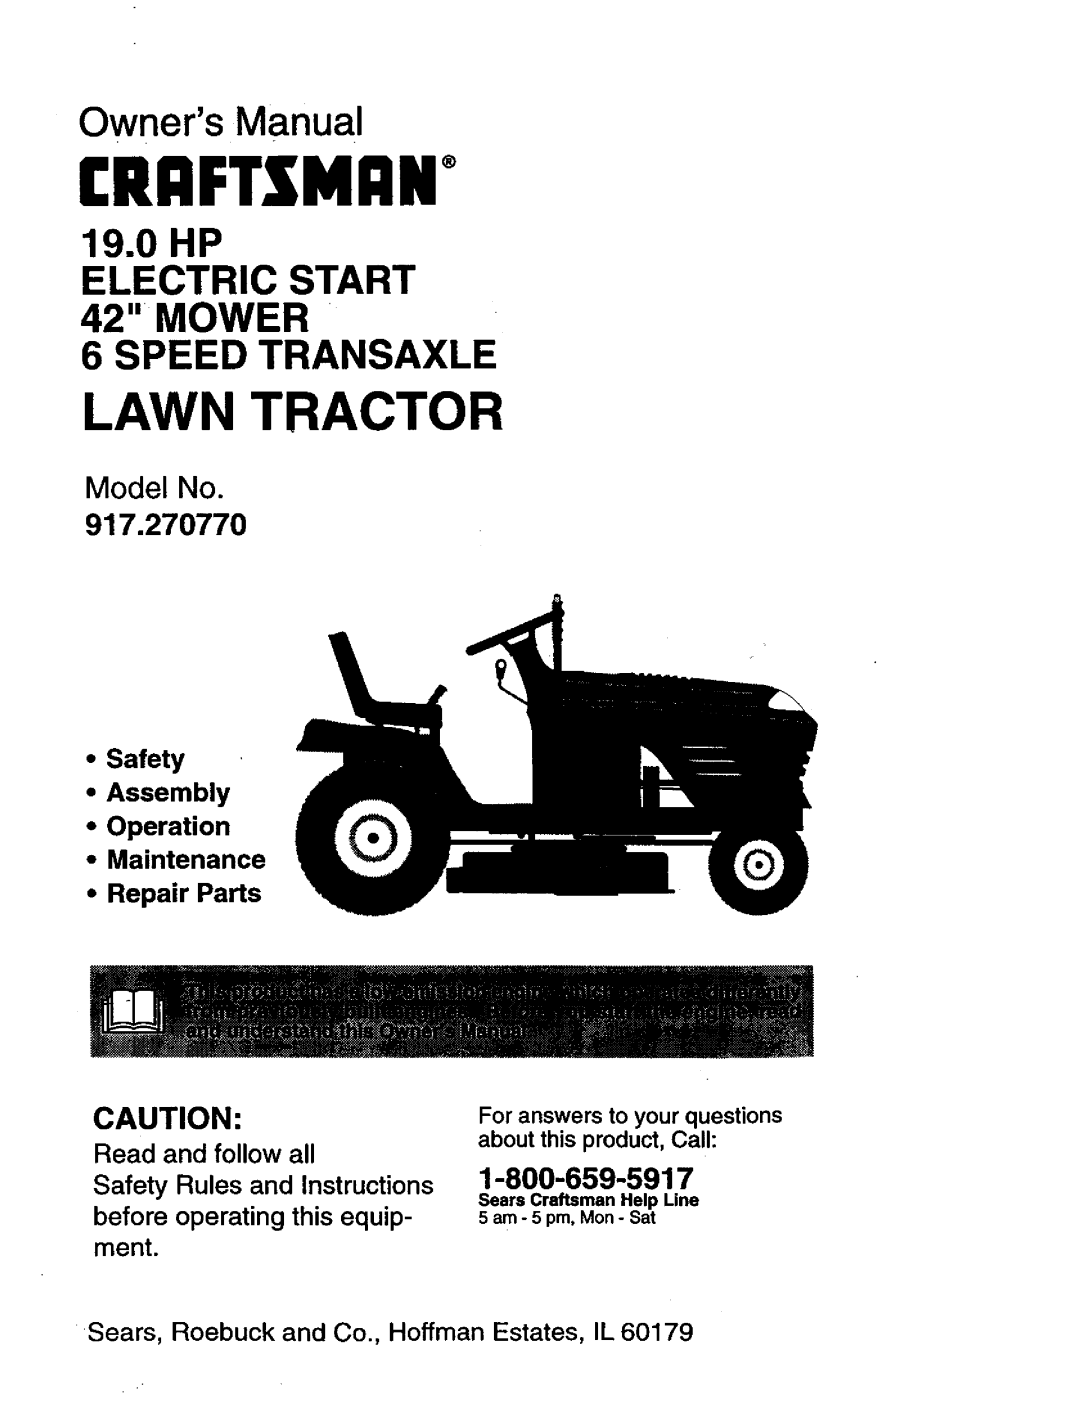 Craftsman manual 917.270770, •Safety •Assembly •Operation •Maintenance, Repair Parts, Read and follow all, Lawn Tractor 